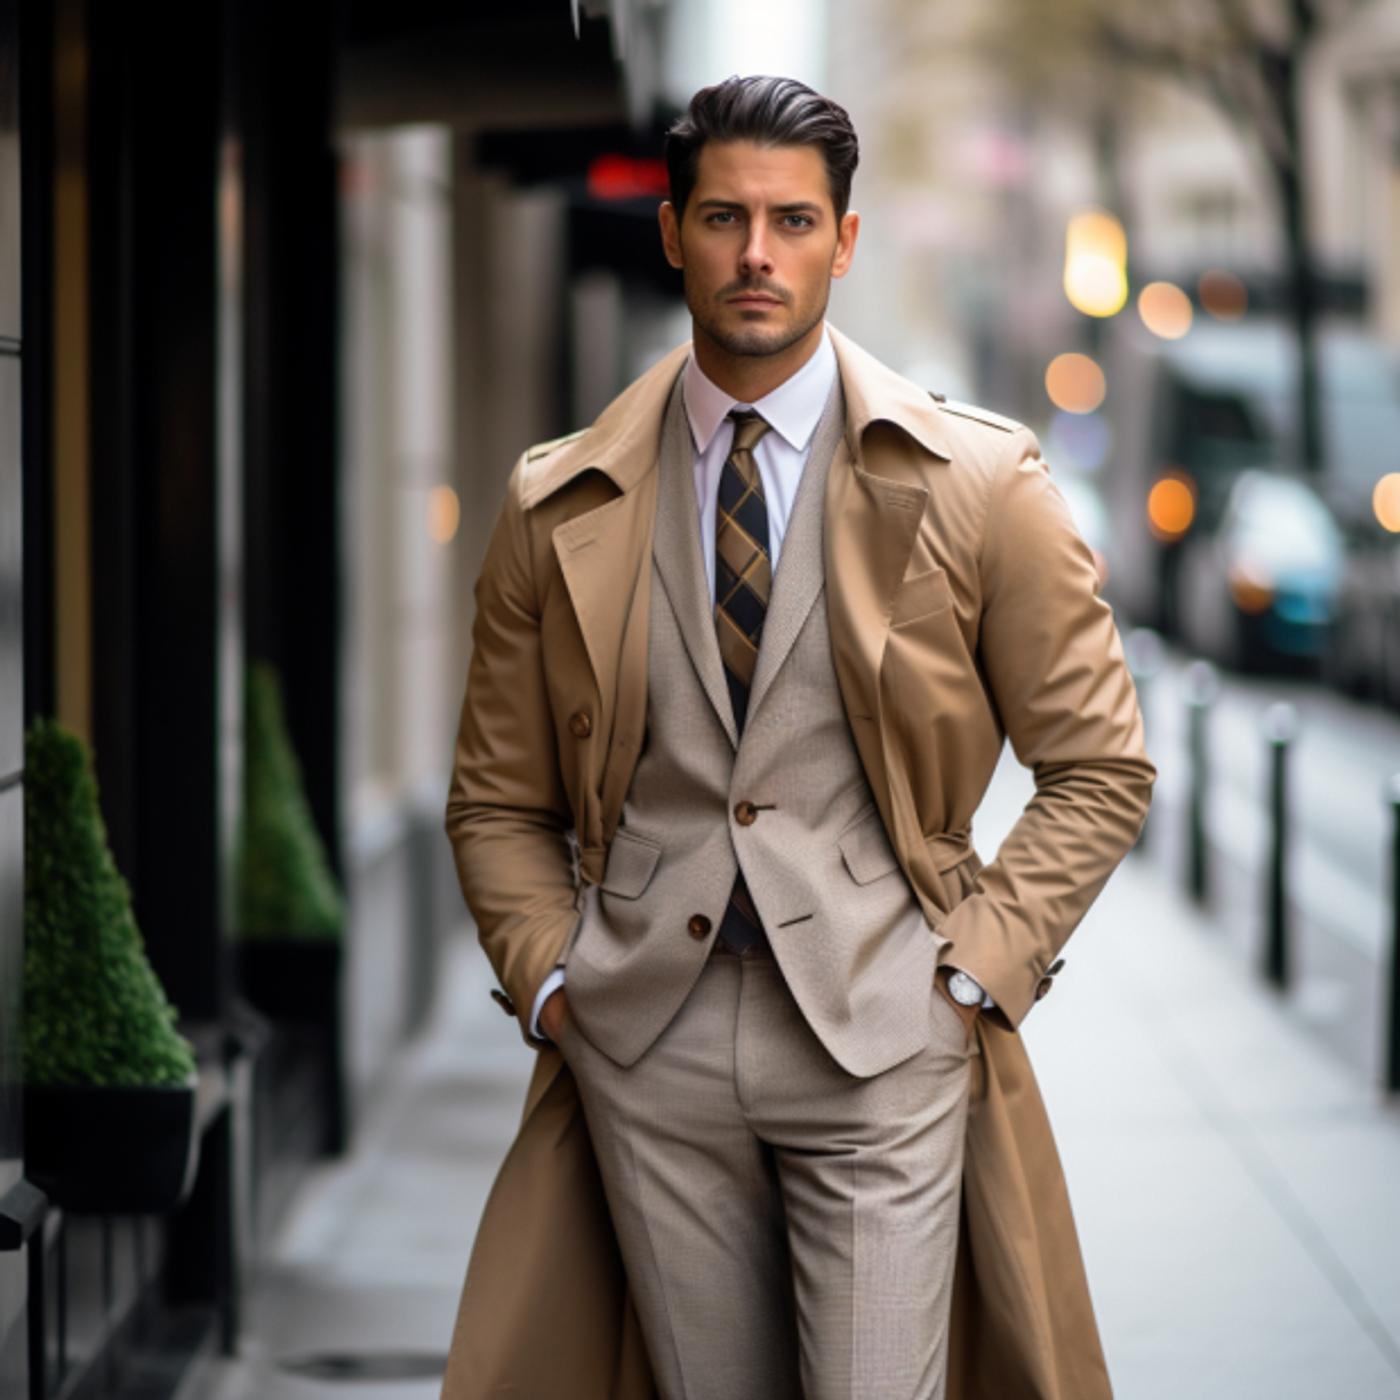 How to Wear a Coat over a Suit - The Guide - Hockerty